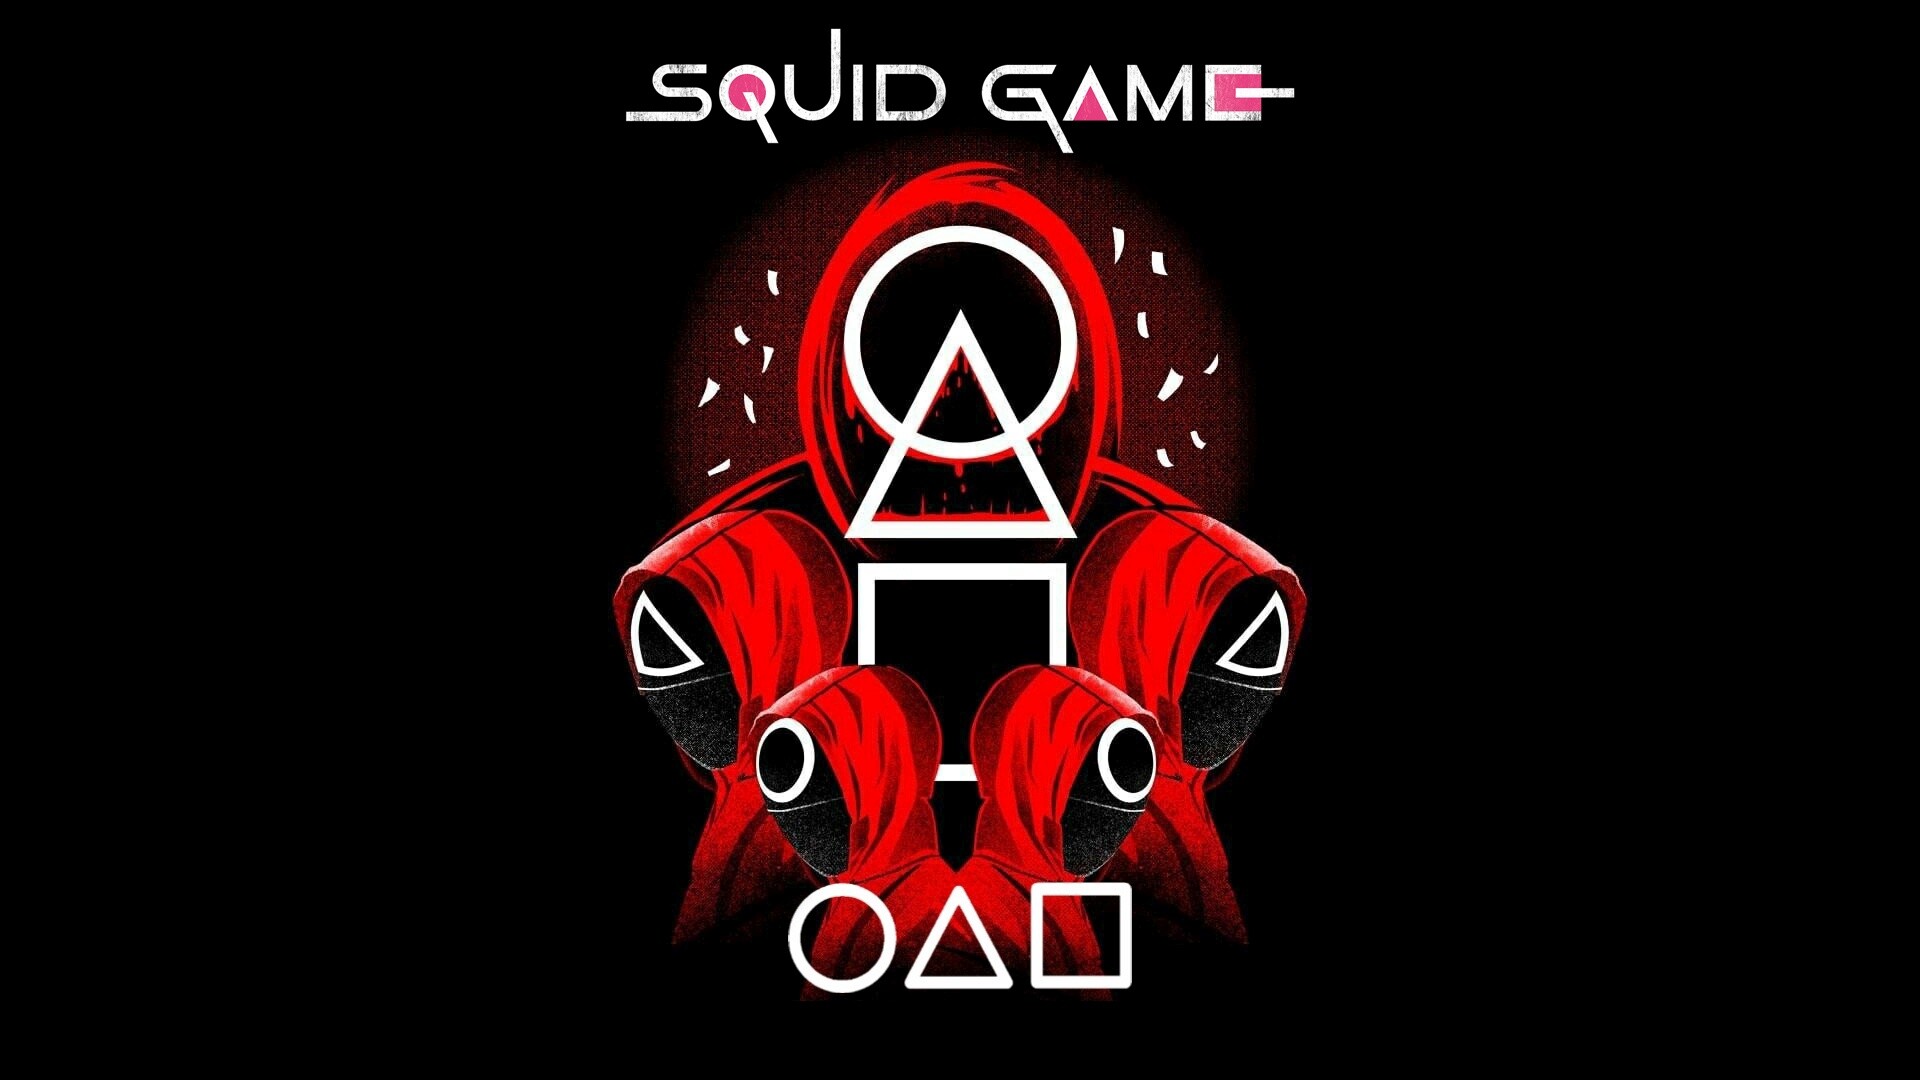 Squid Game: The show has inspired a number of viral memes and Halloween costumes. 1920x1080 Full HD Wallpaper.